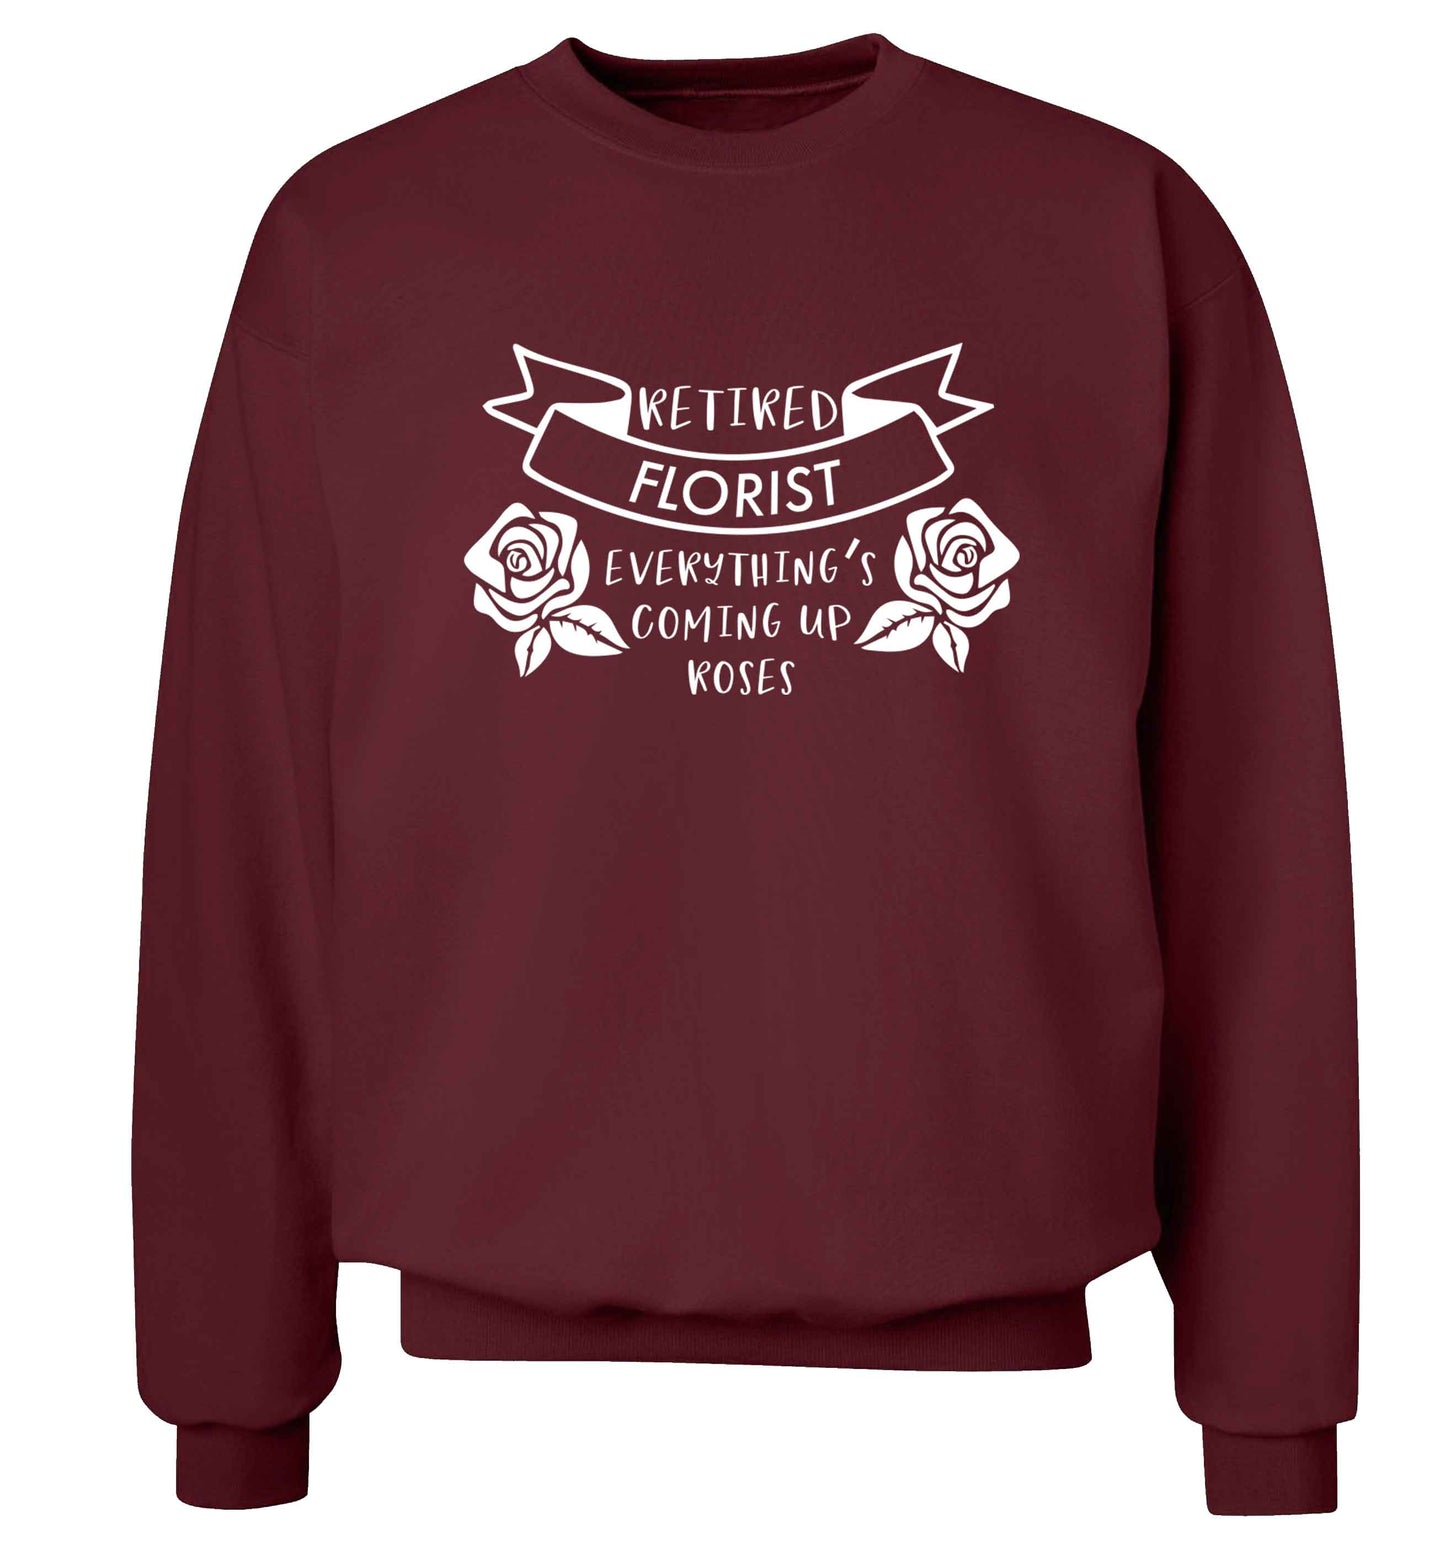 Retired florist everything's coming up roses Adult's unisex maroon Sweater 2XL